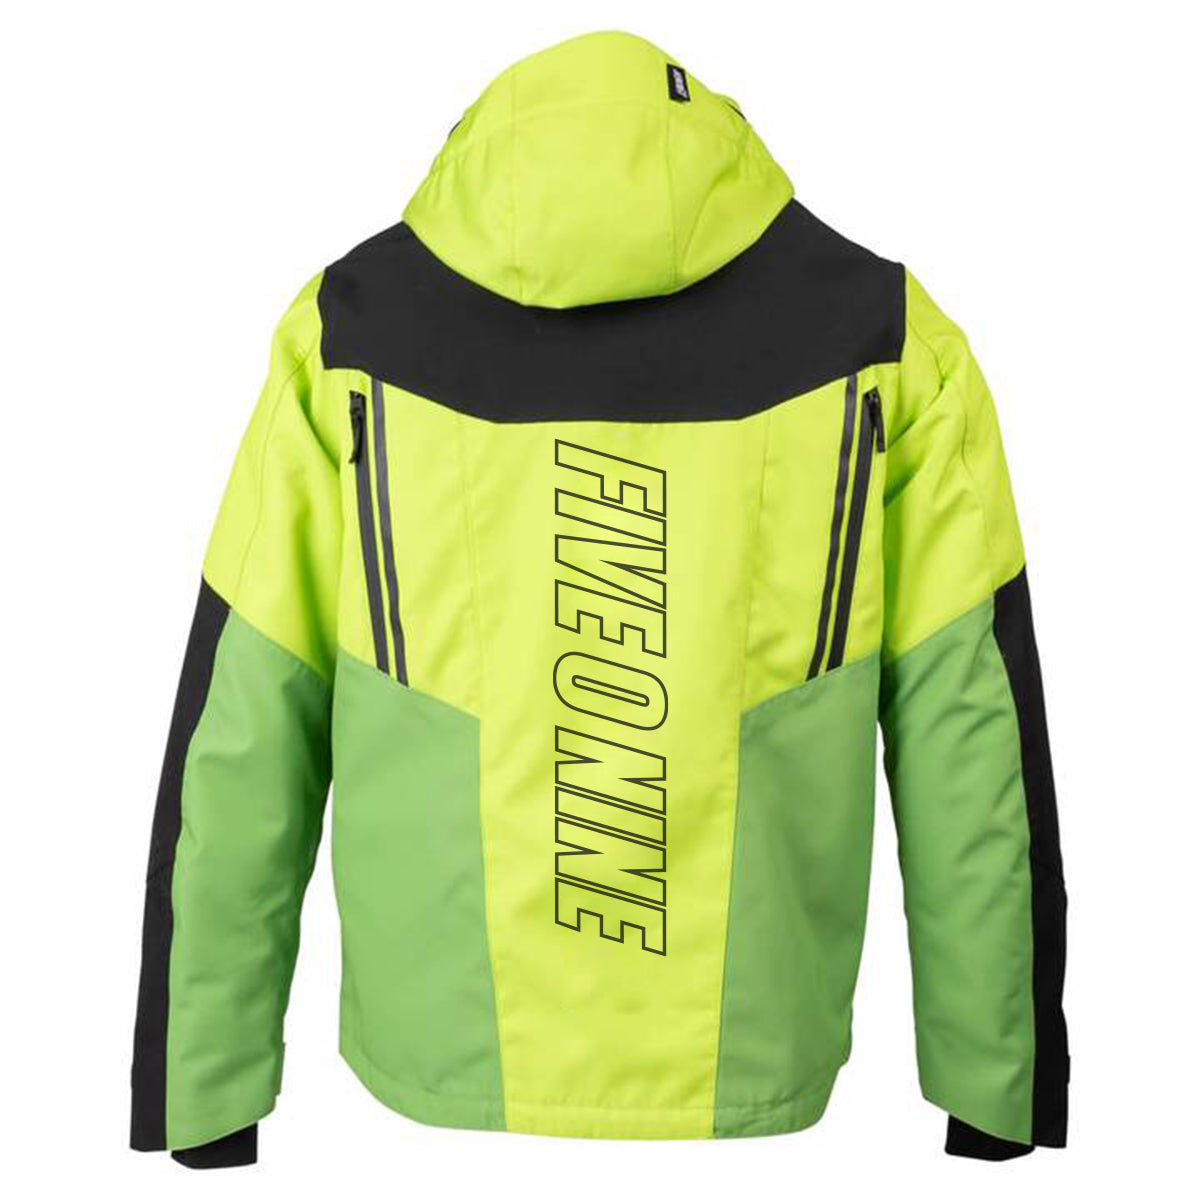 R-200 Insulated Crossover Jacket